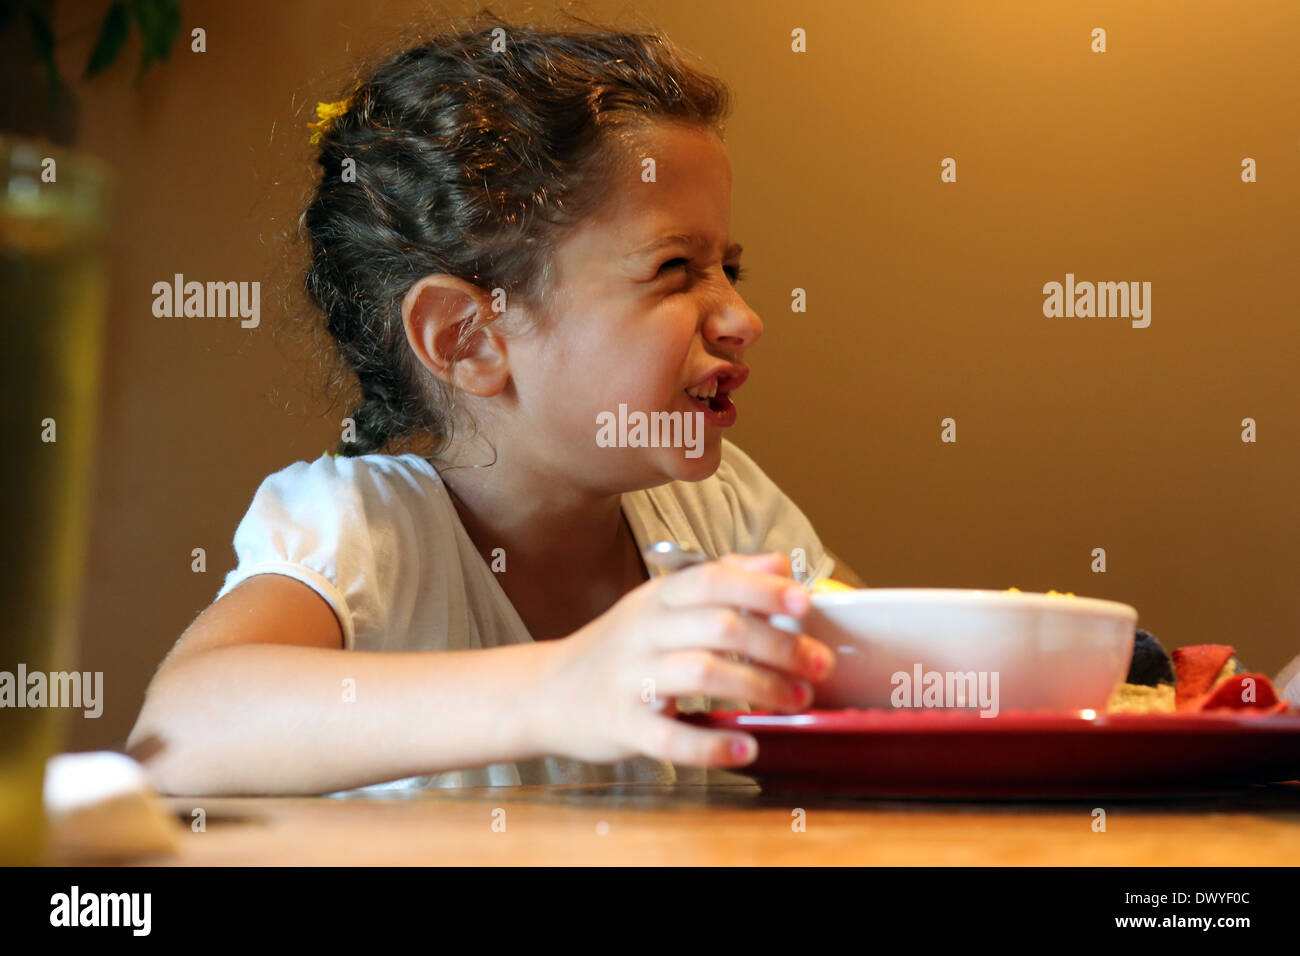 Du Bois, United States of America, little girl draws while eating the nose krauss Stock Photo